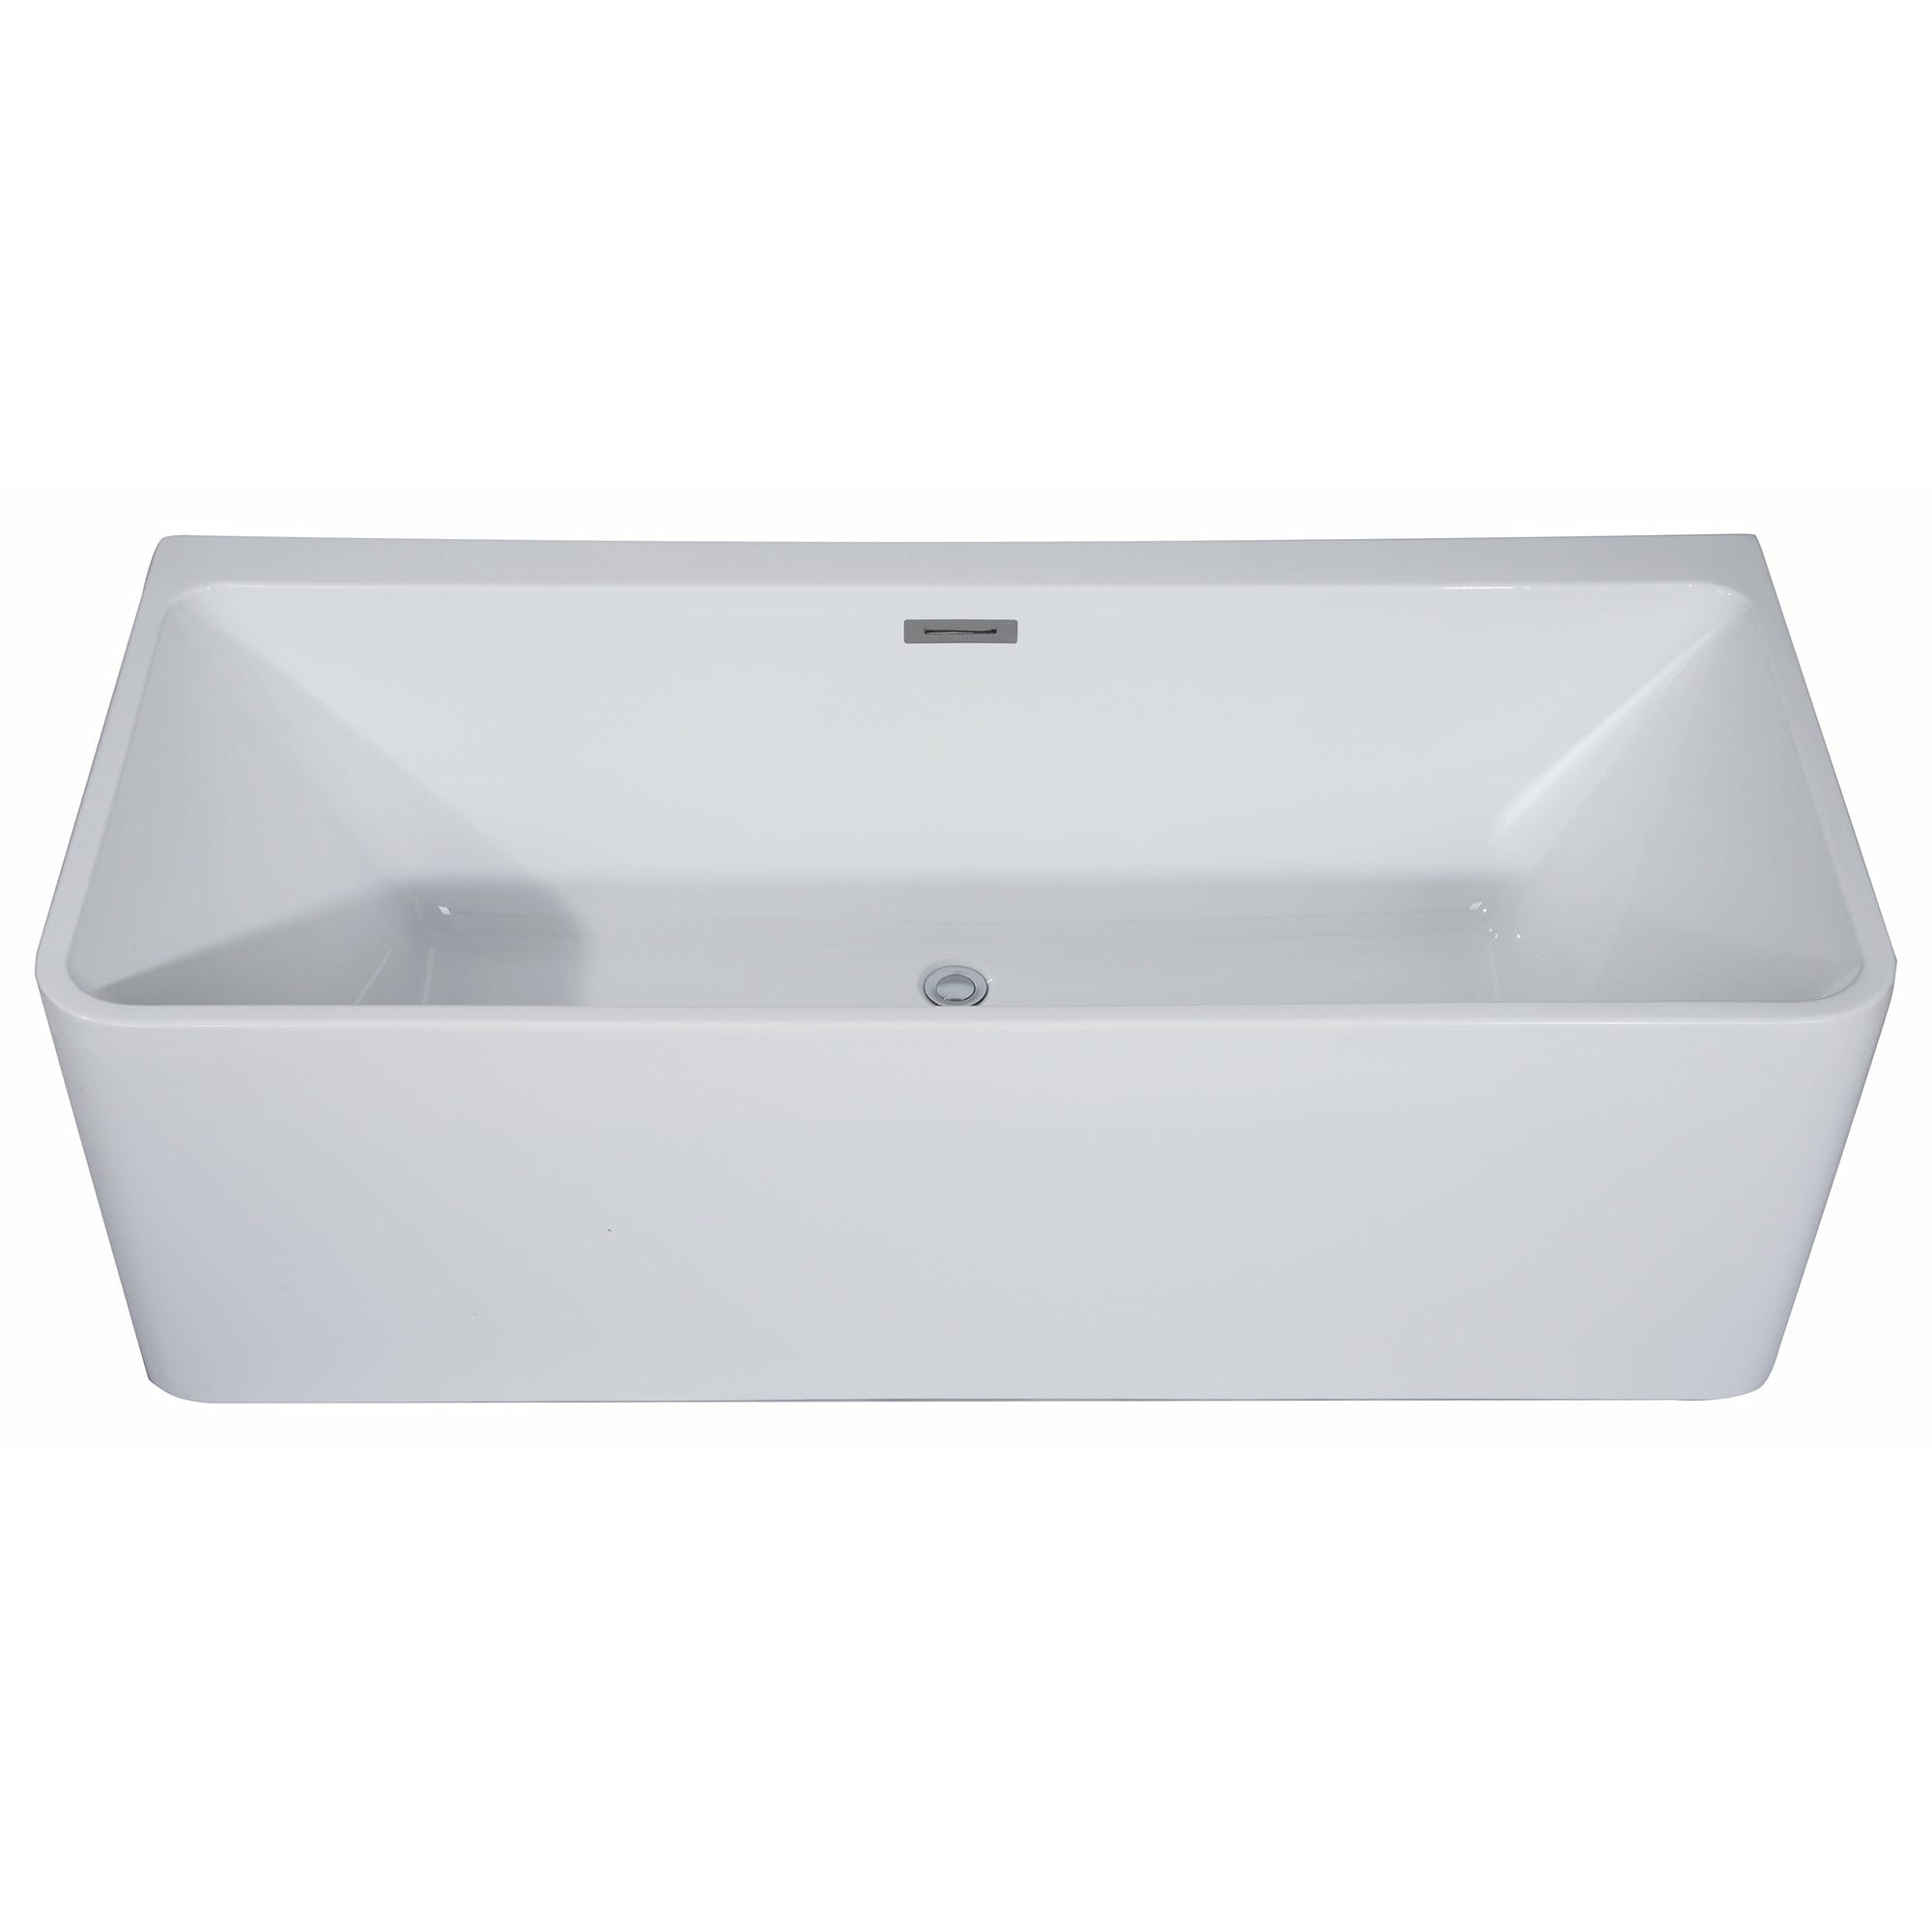 ALFI AB8858 59 inch White Rectangular Acrylic Free Standing Soaking Bathtub with drain and polished chrome overflow in a white background, 1 person capacity